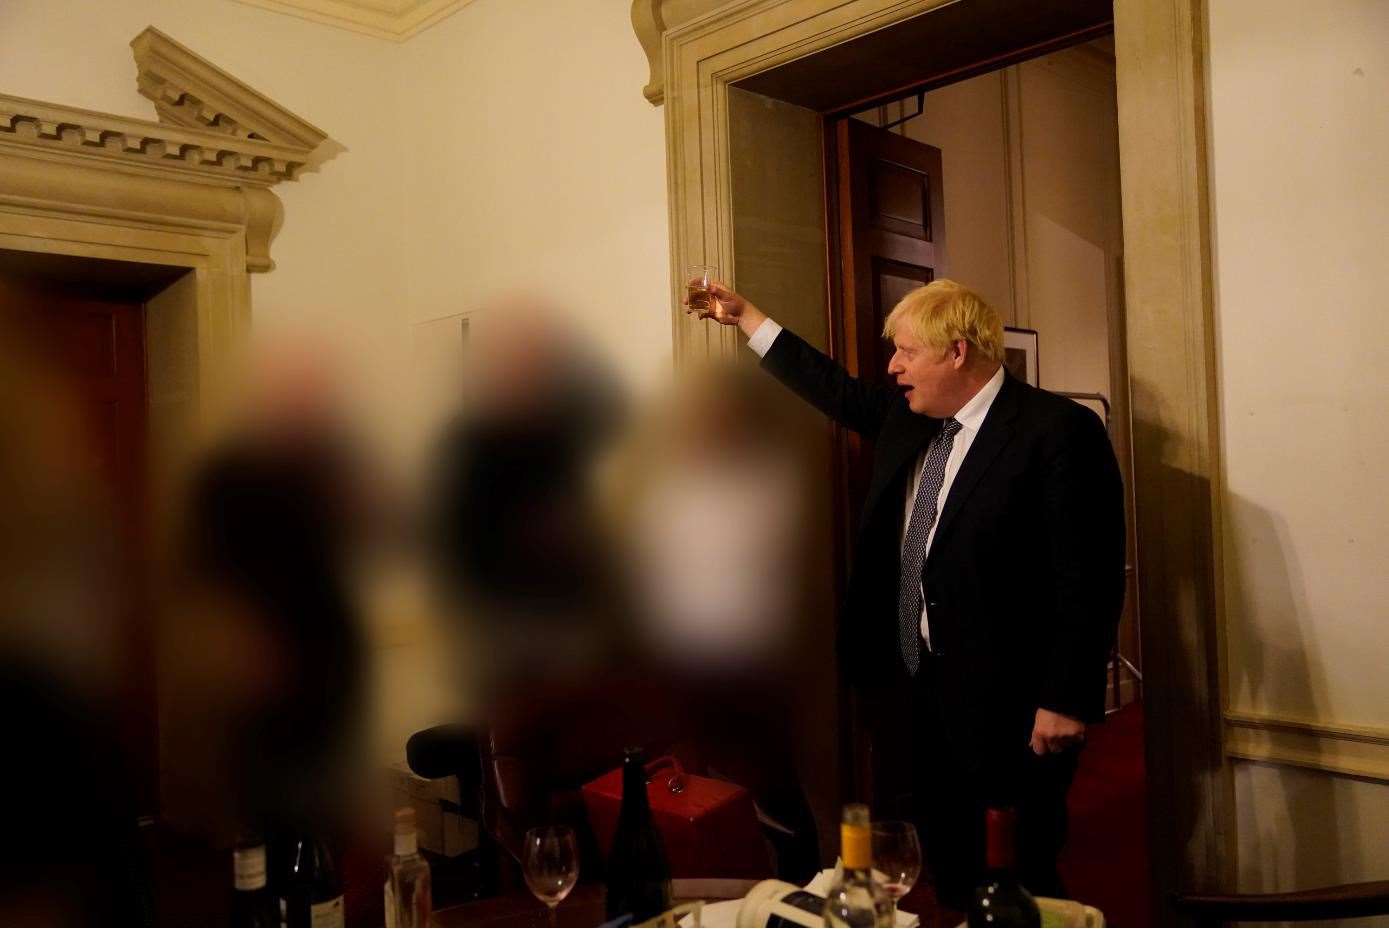 Former prime minister Boris Johnson was pictured at No 10 gatherings that were investigated (Sue Gray Report/Cabinet Office/PA)